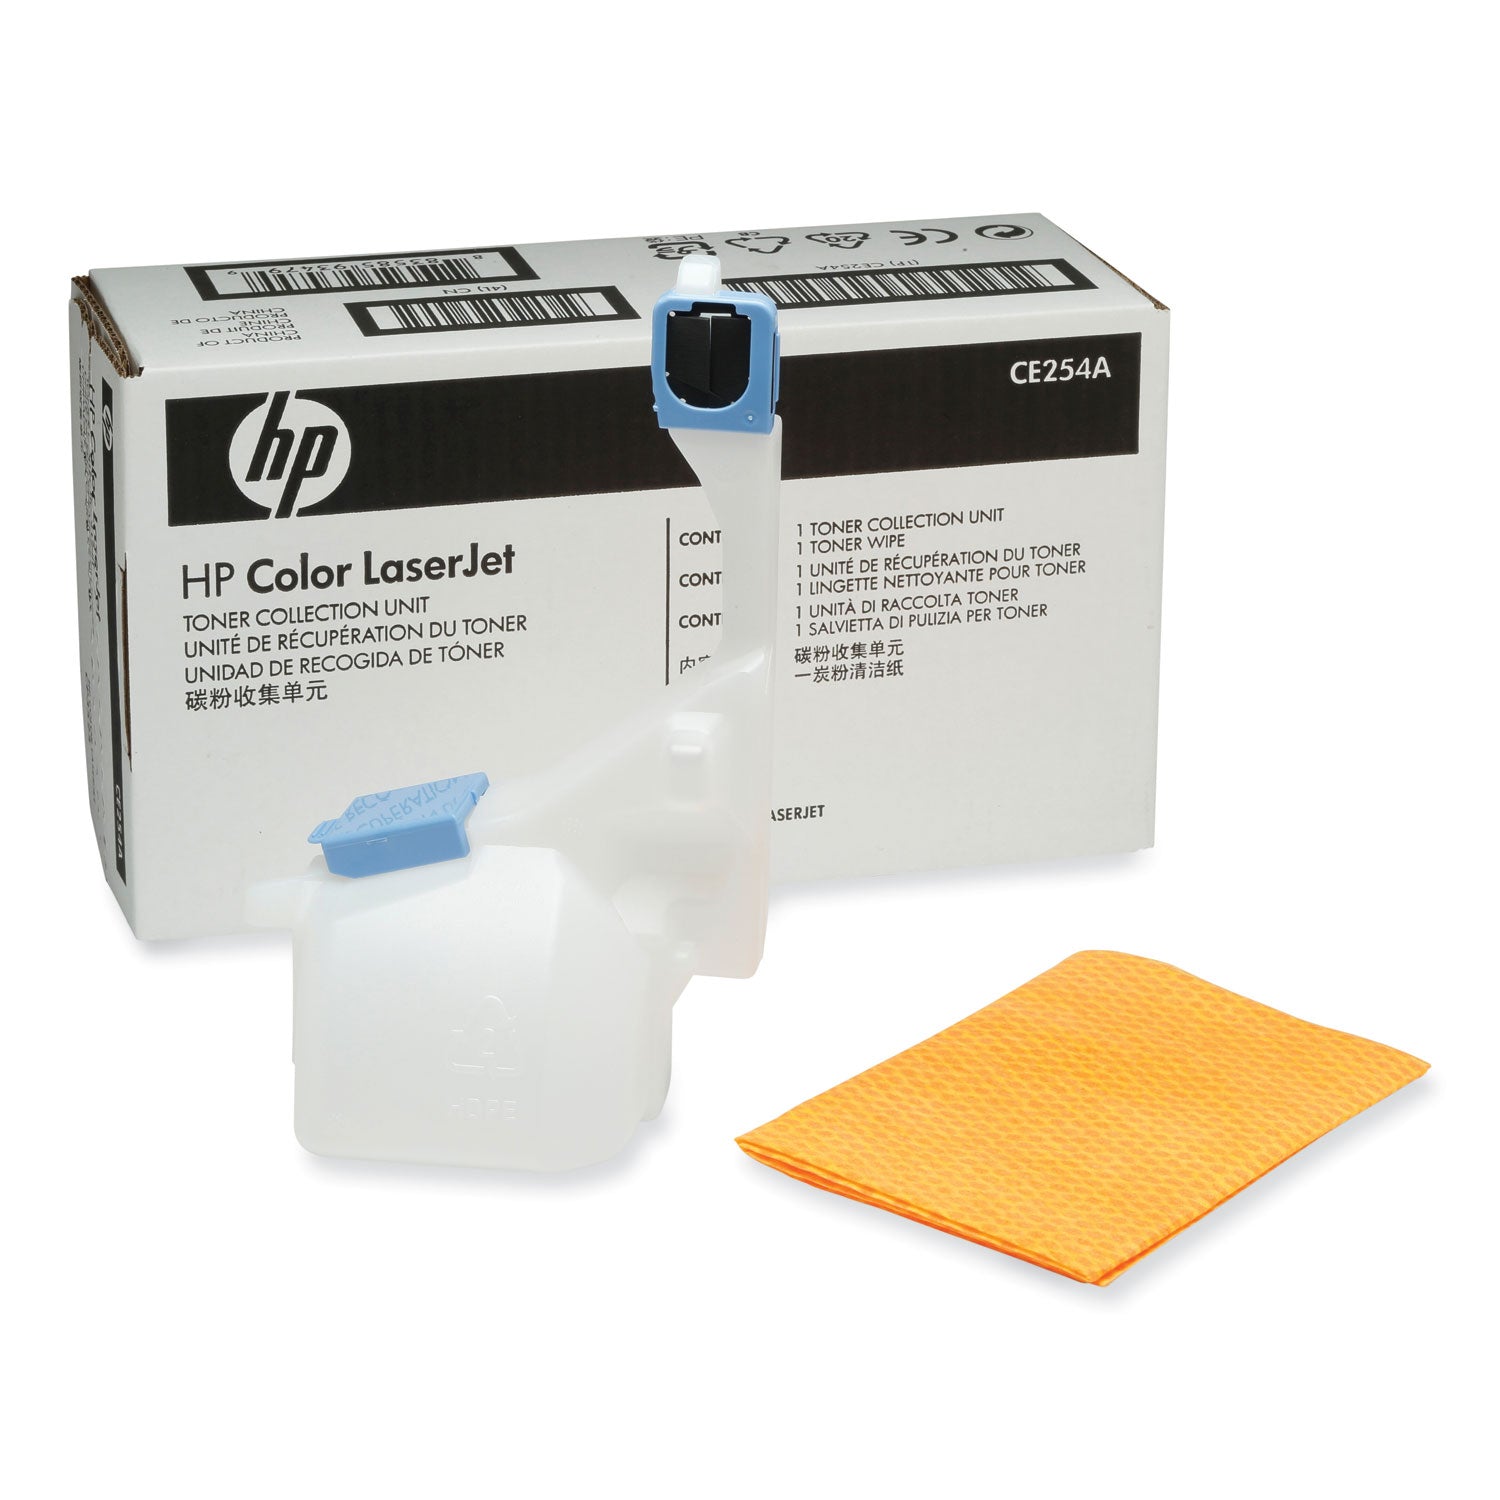 ce254a-hp-504a-toner-collection-unit-36000-page-yield_hewce254a - 2